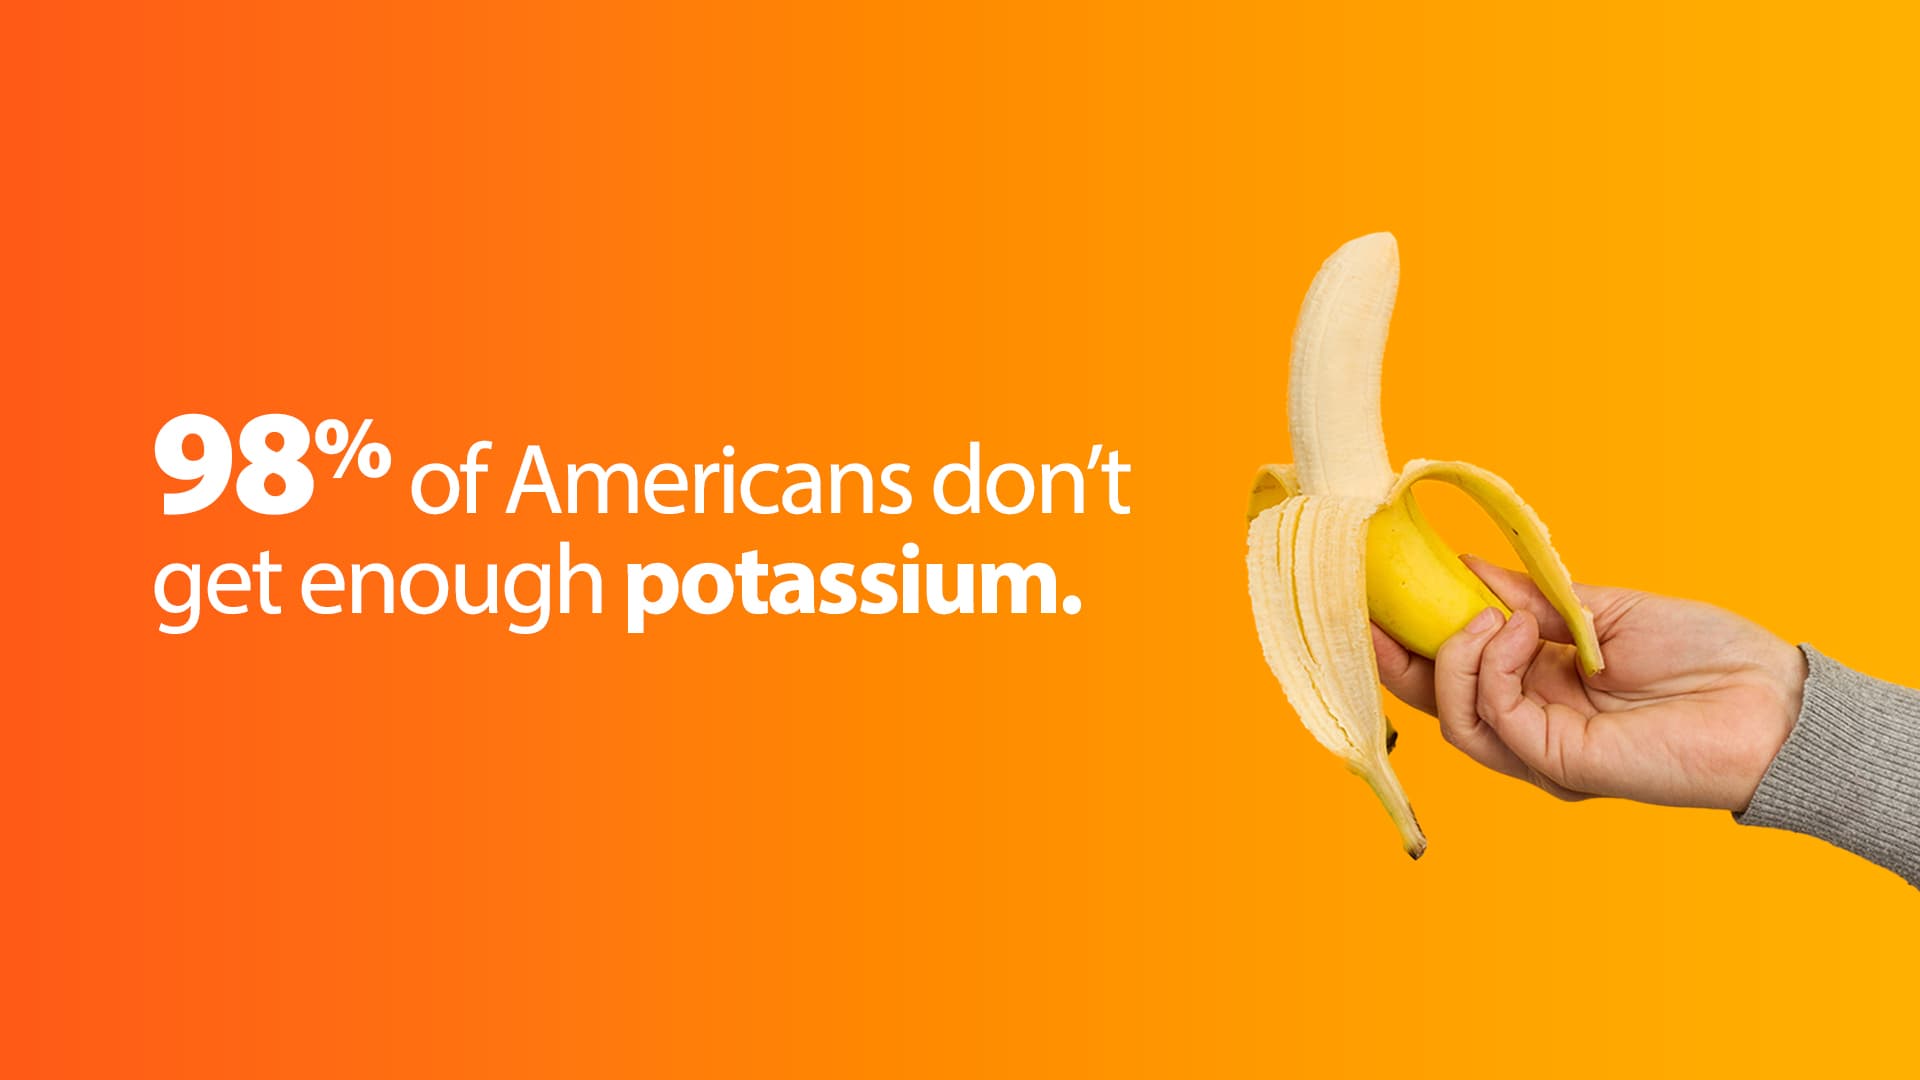 98% of Americans are not getting enough Potassium...